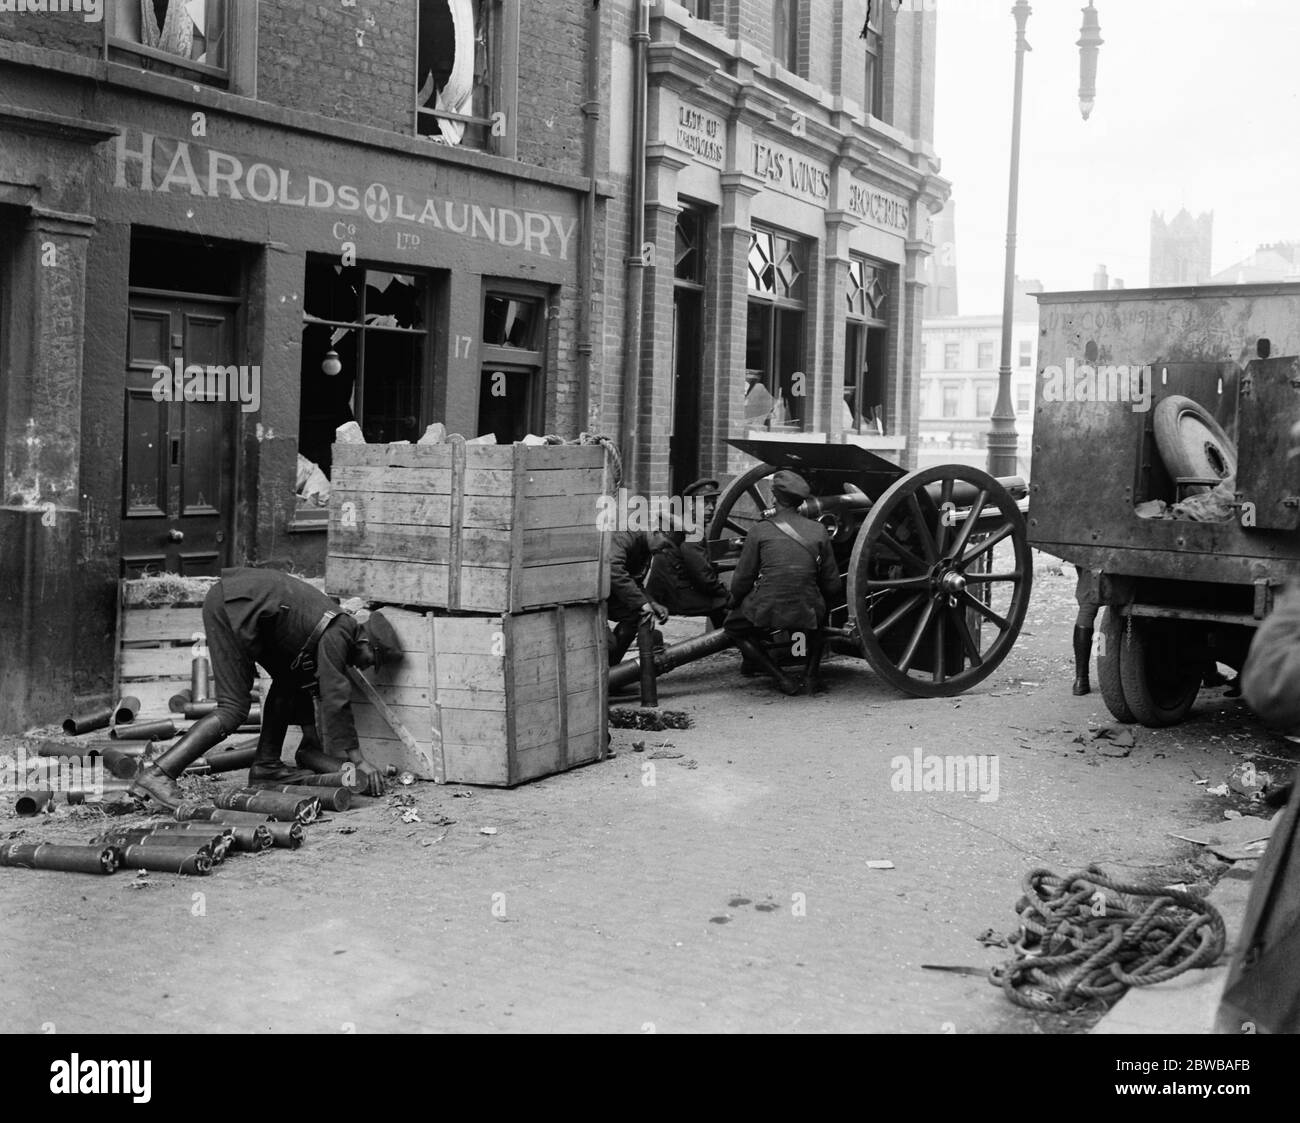 The Great Battle of Dublin . An Irish Free State 18 pounder gun bombarding the Four Courts before the capture . High explosive shells being used . 30 June 1922 Stock Photo